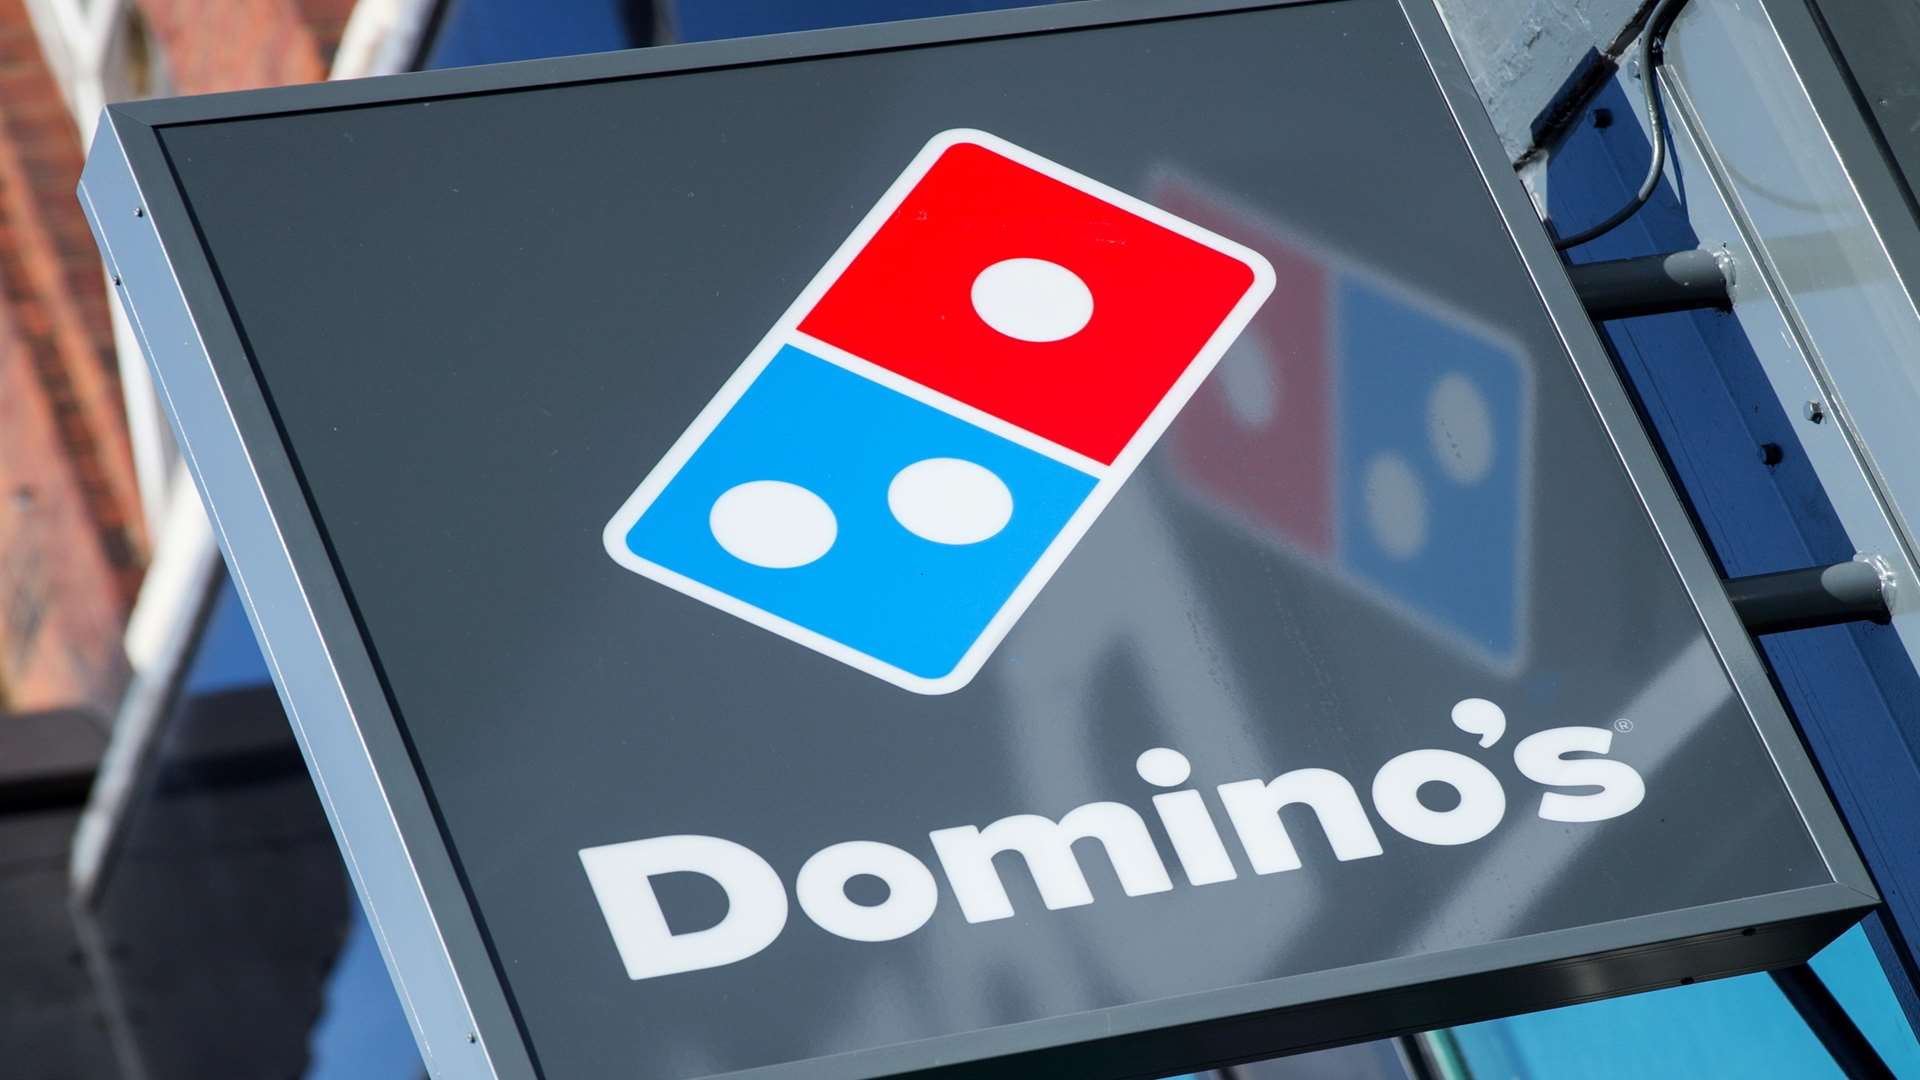 A Domino's sign. Credit: Domino's Pizza Group Ltd.